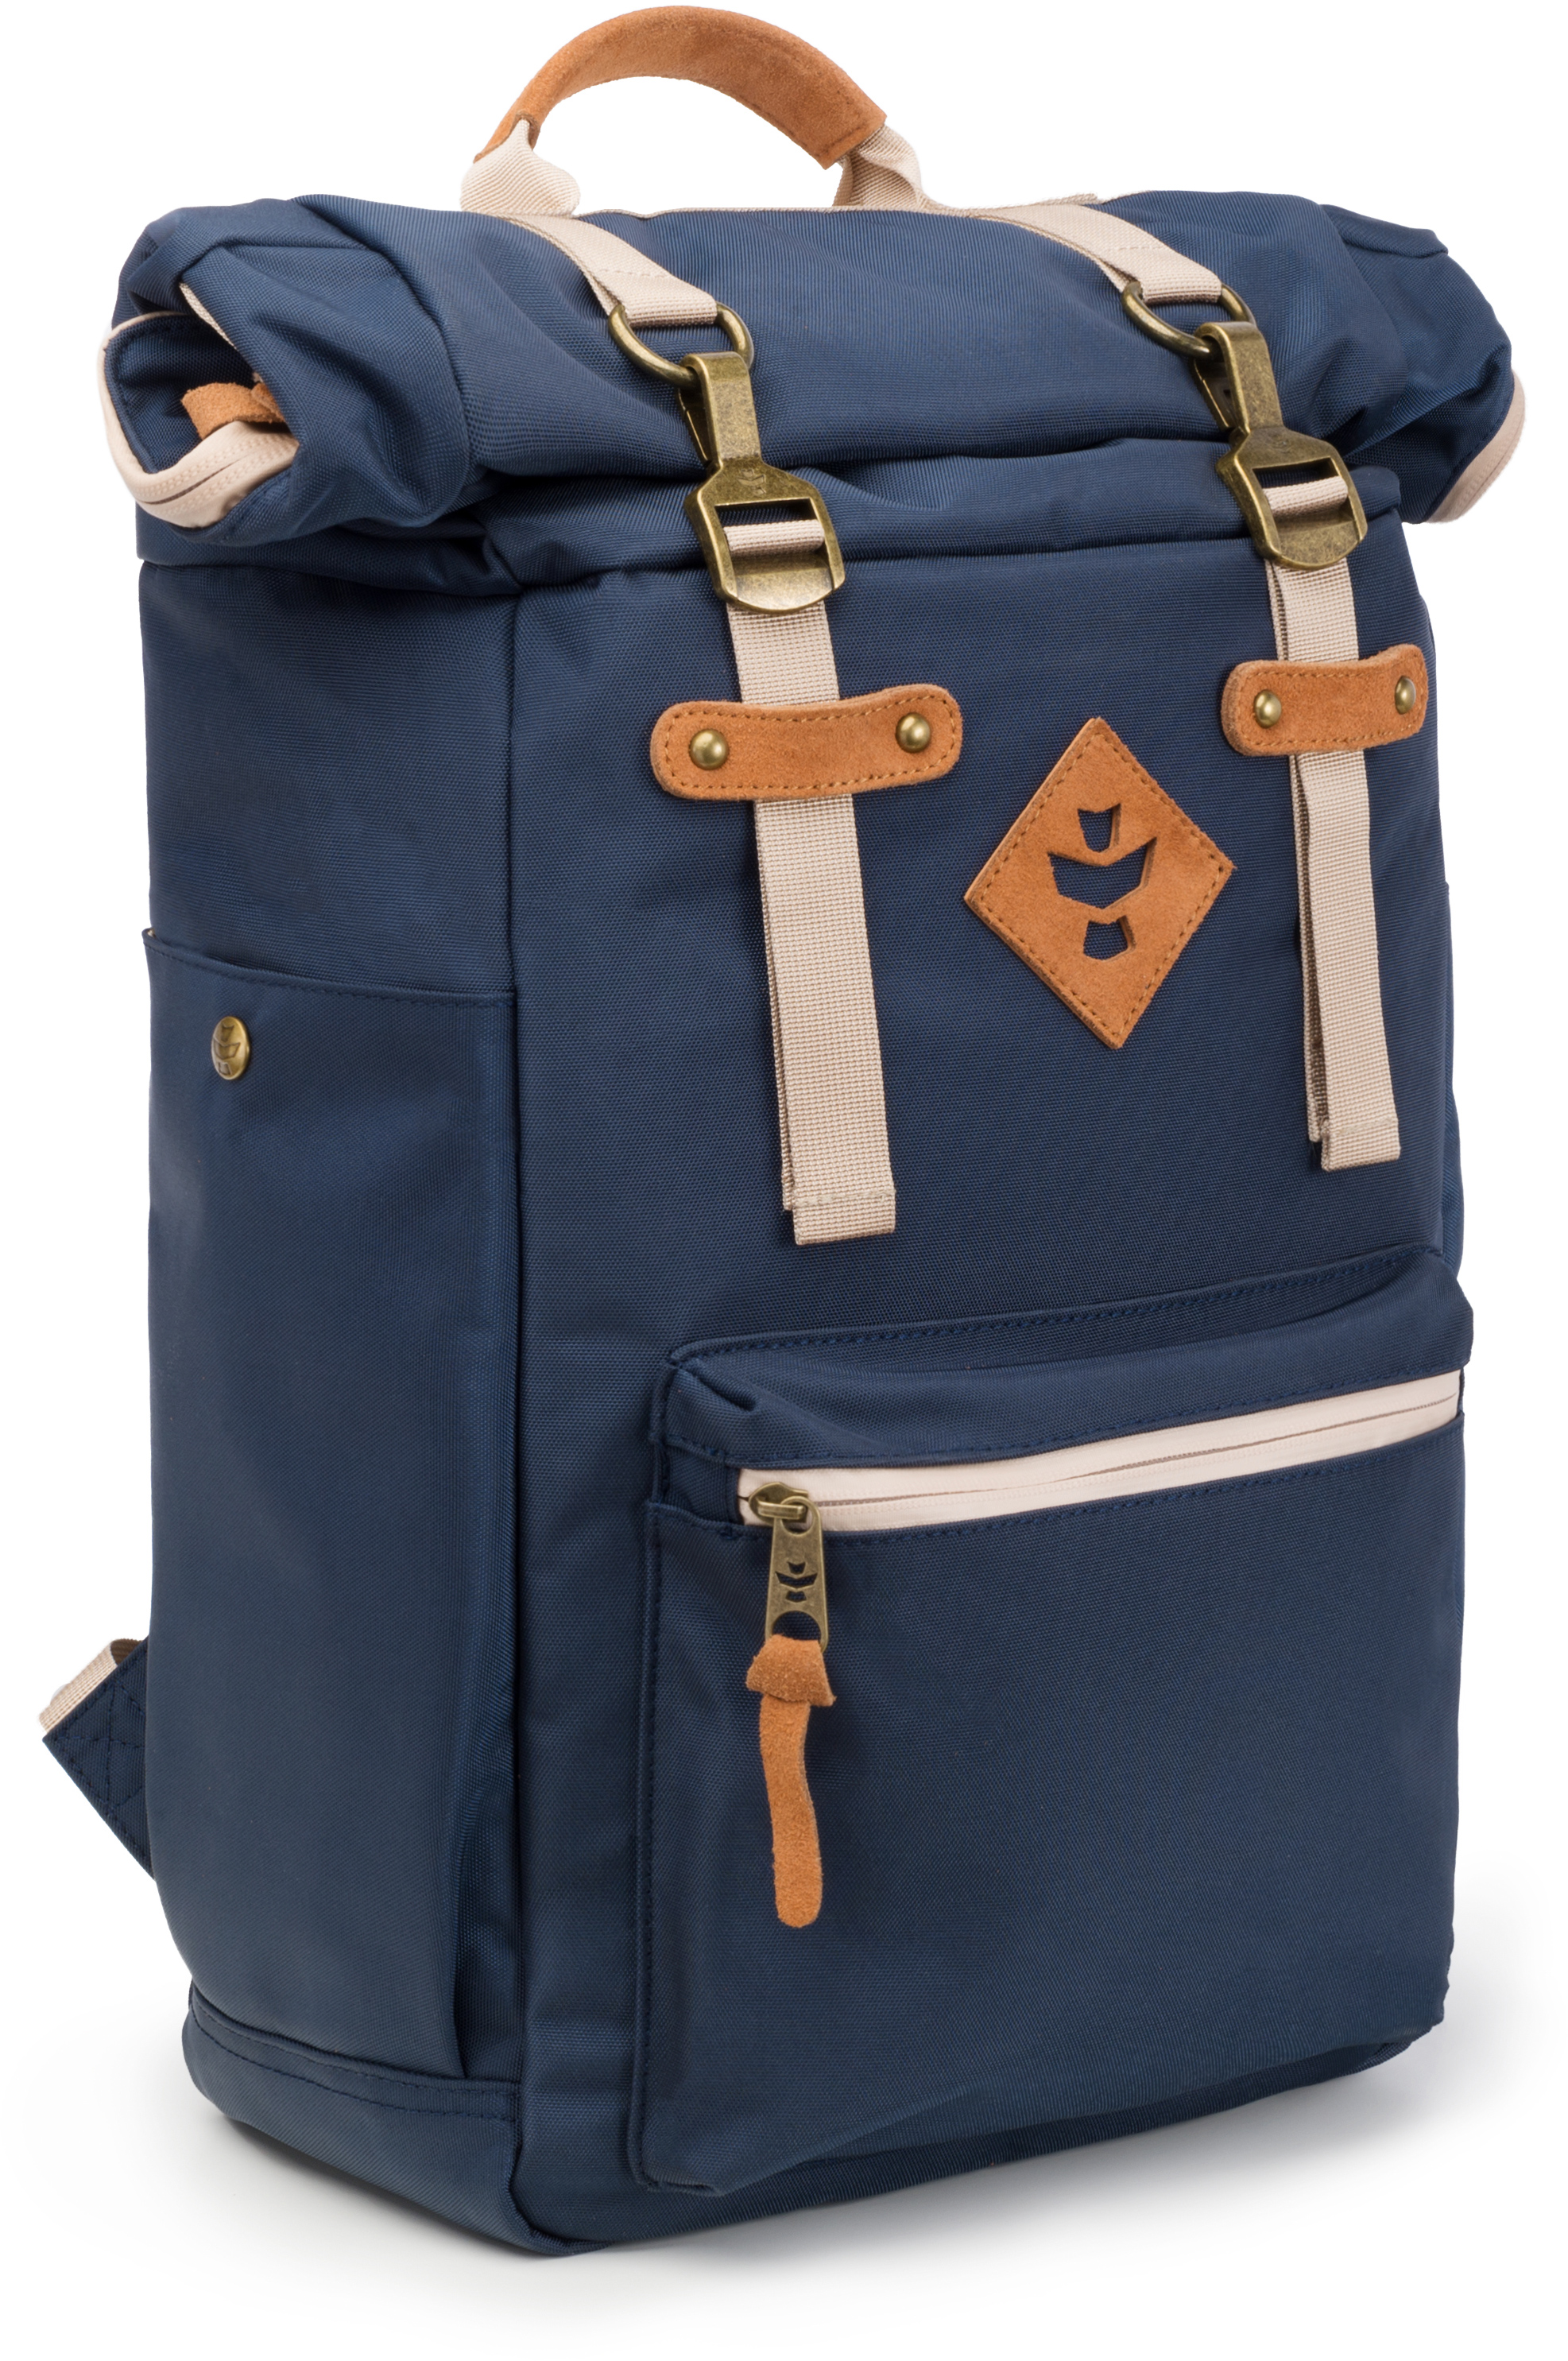 Picture for Revelry Supply The Drifter Rolltop Backpack, Navy Blue